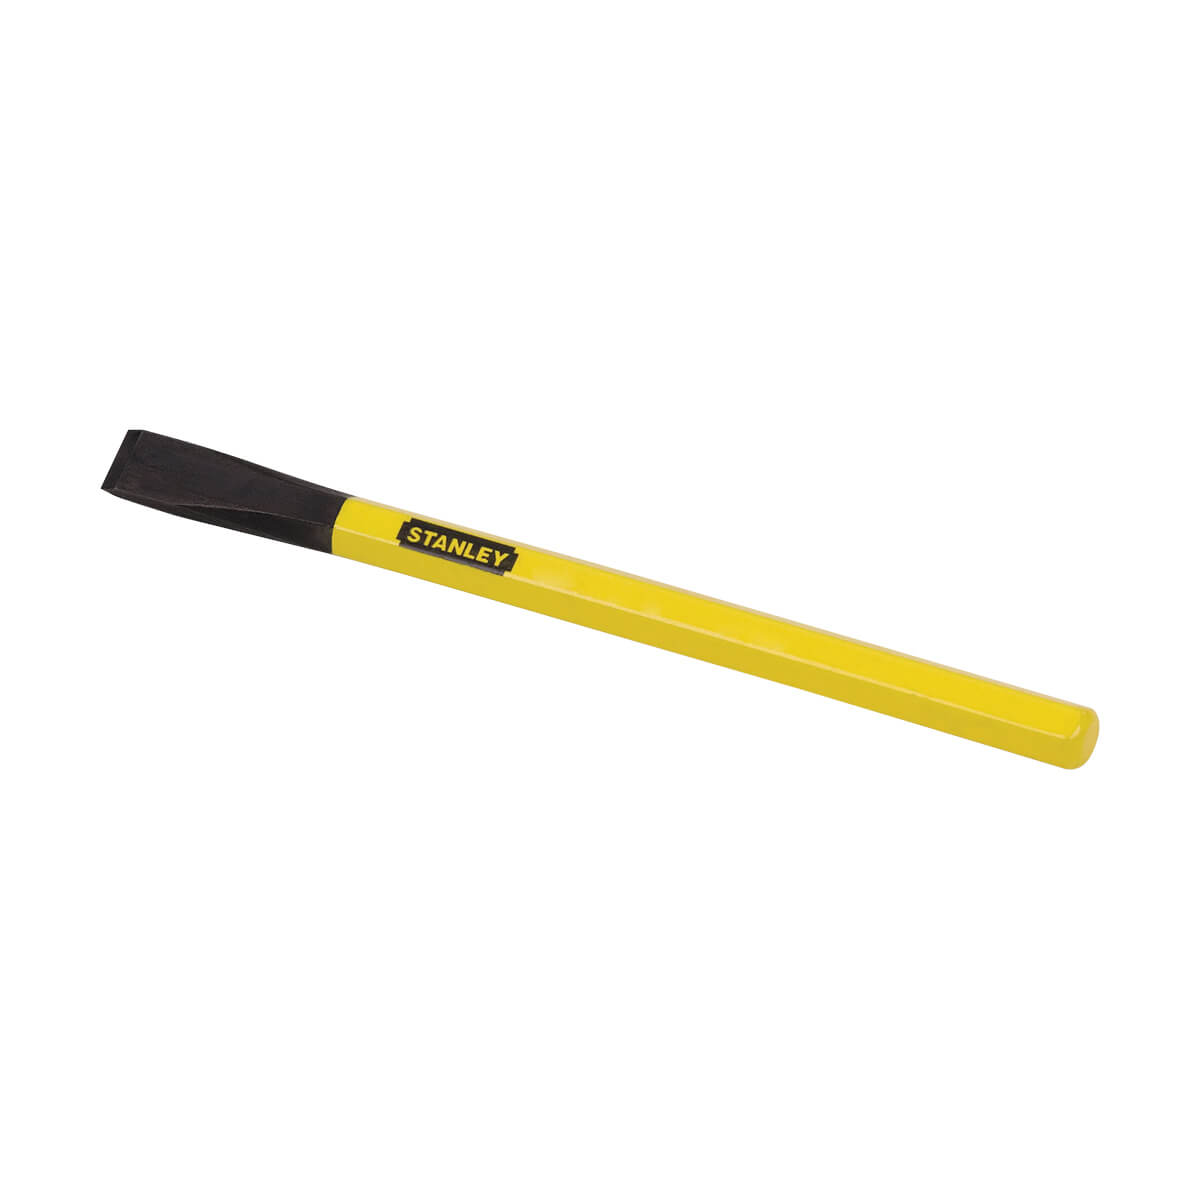 Stanley Cold Chisel - 3/4-in x 6-7/8-in